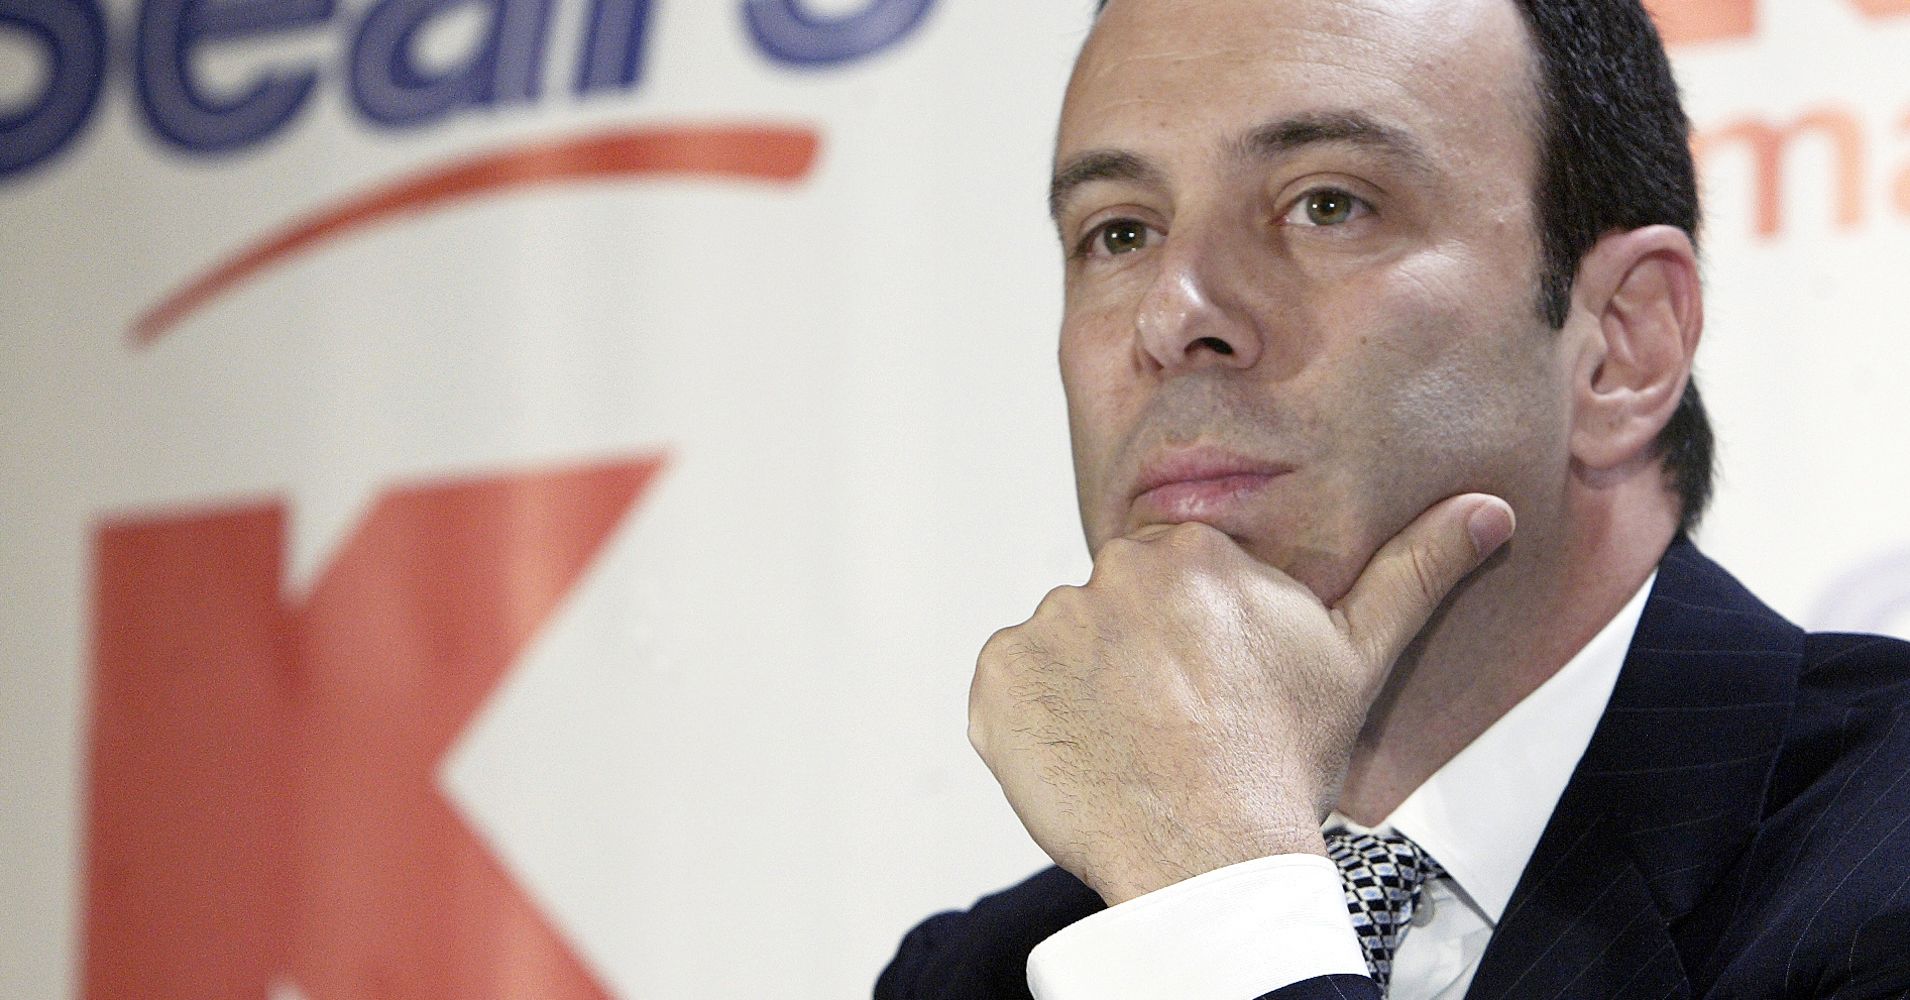 In this Nov. 17, 2004 file photo, Kmart chairman Edward Lampert listens during a news conference to announce the merger of Kmart and Sears in New York.